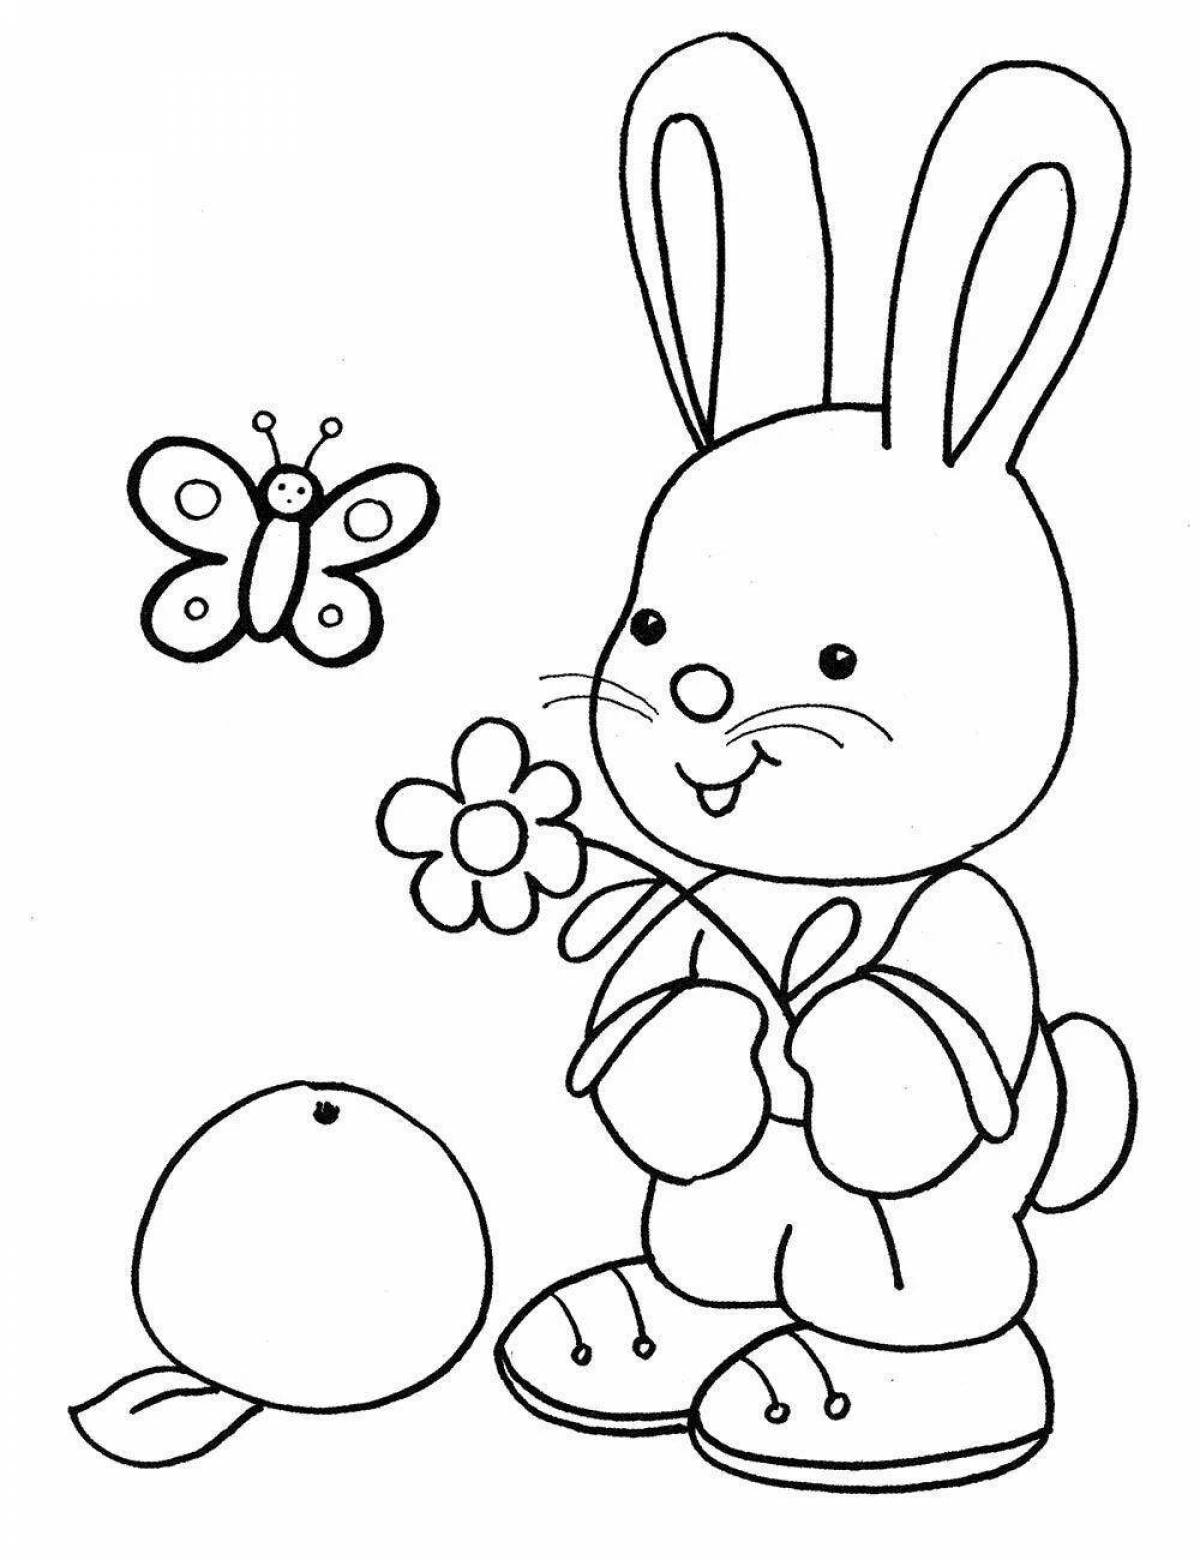 Colorful coloring page 3 4